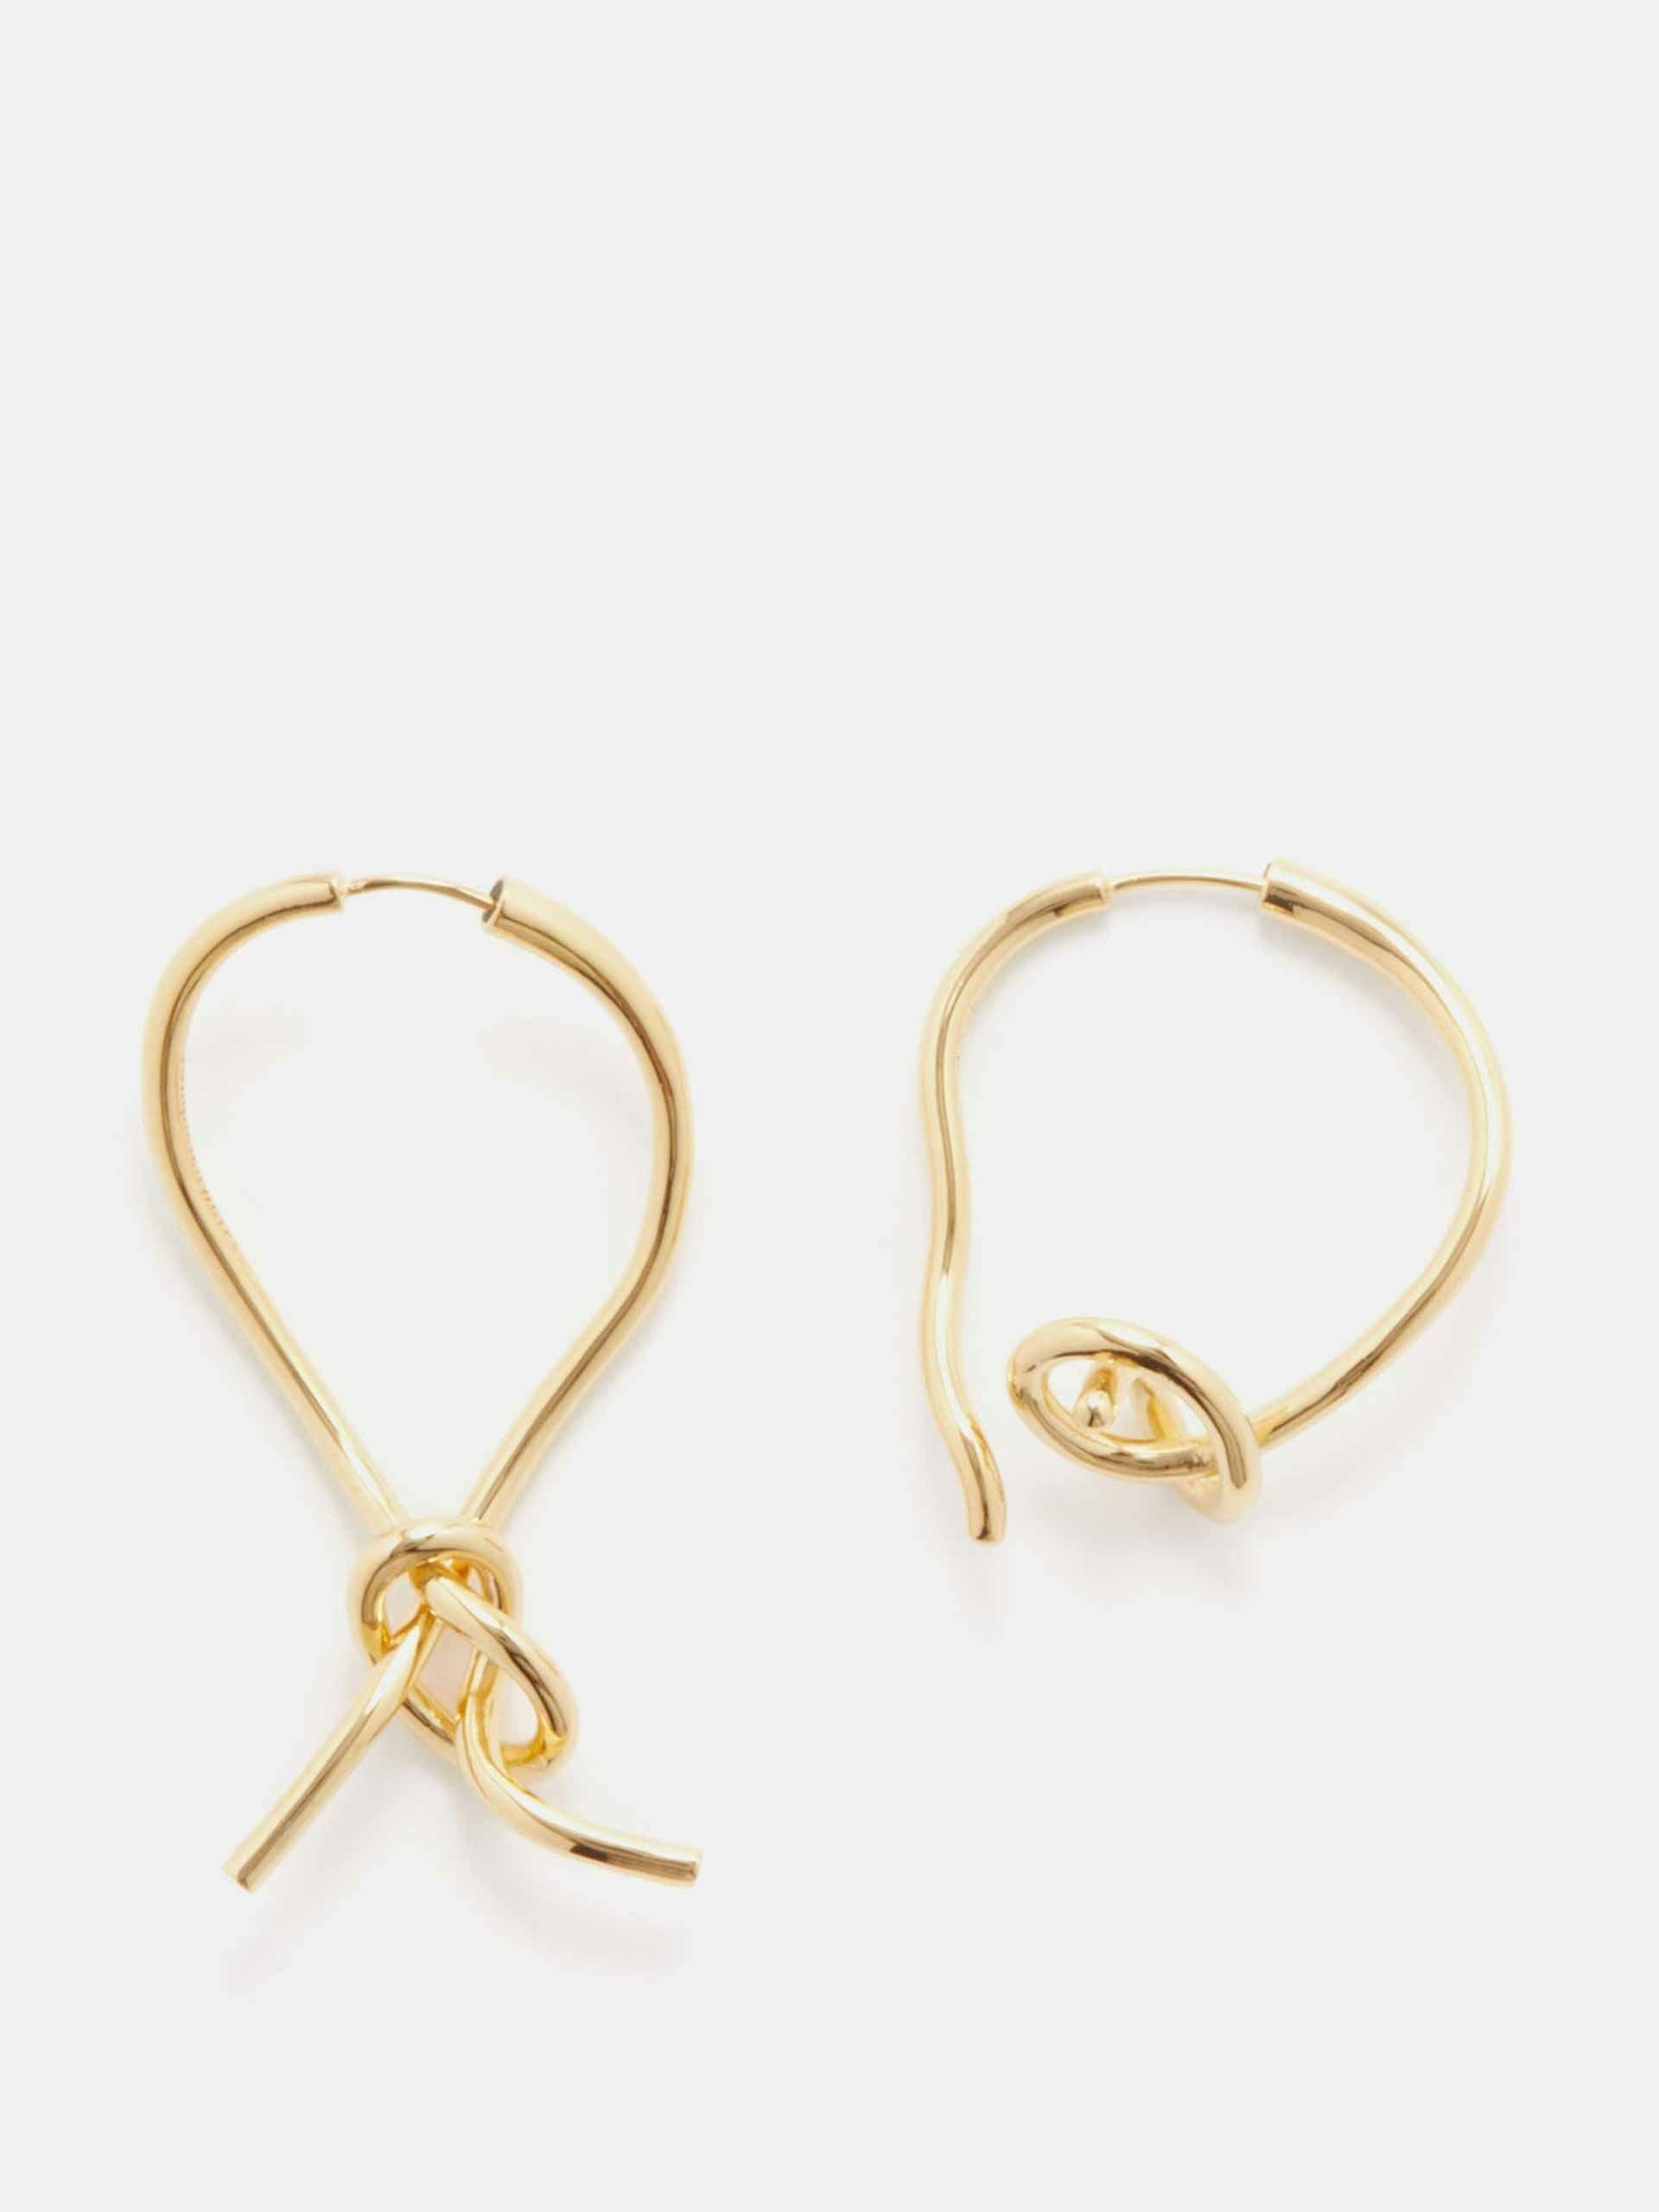 Mismatched knot gold hoop earrings